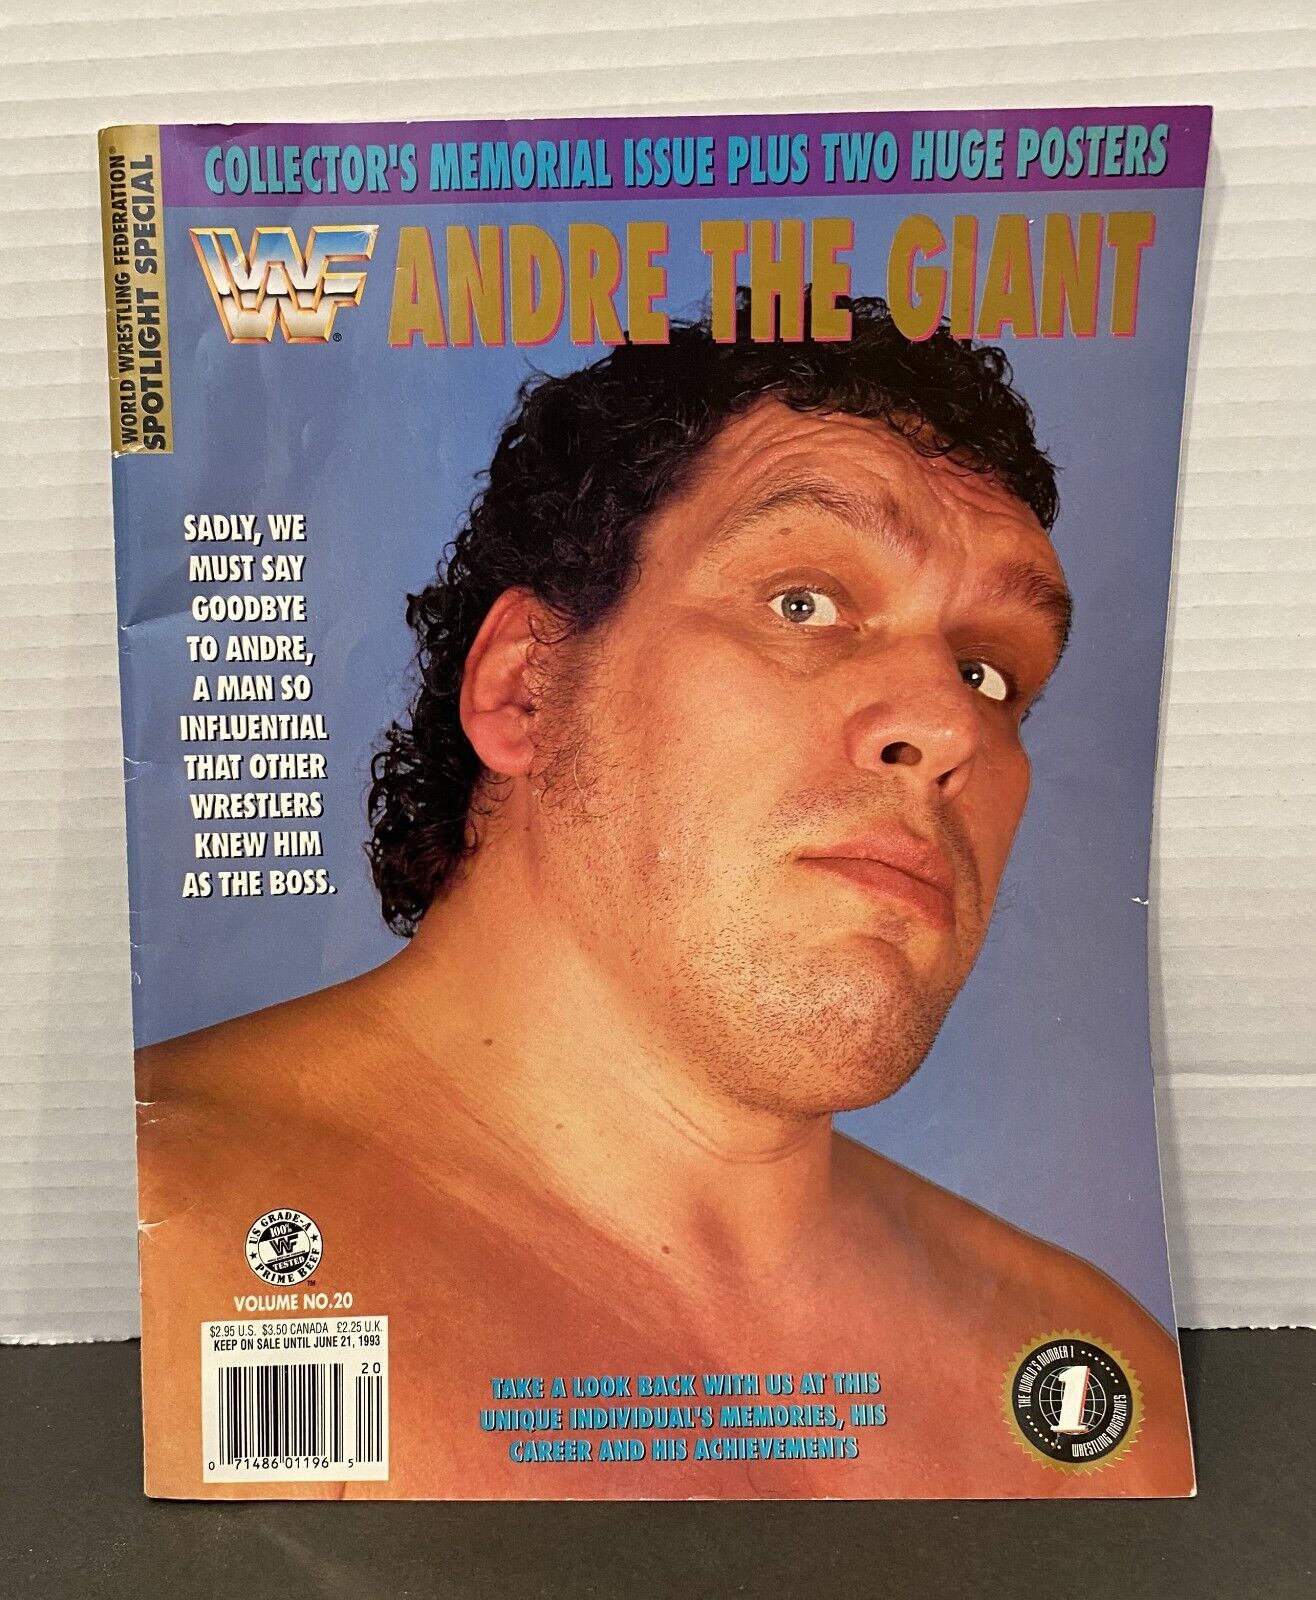 WWF Vintage 1988 Spotlight Collector's Magazine Andre The Giant vol. 20 Tribute